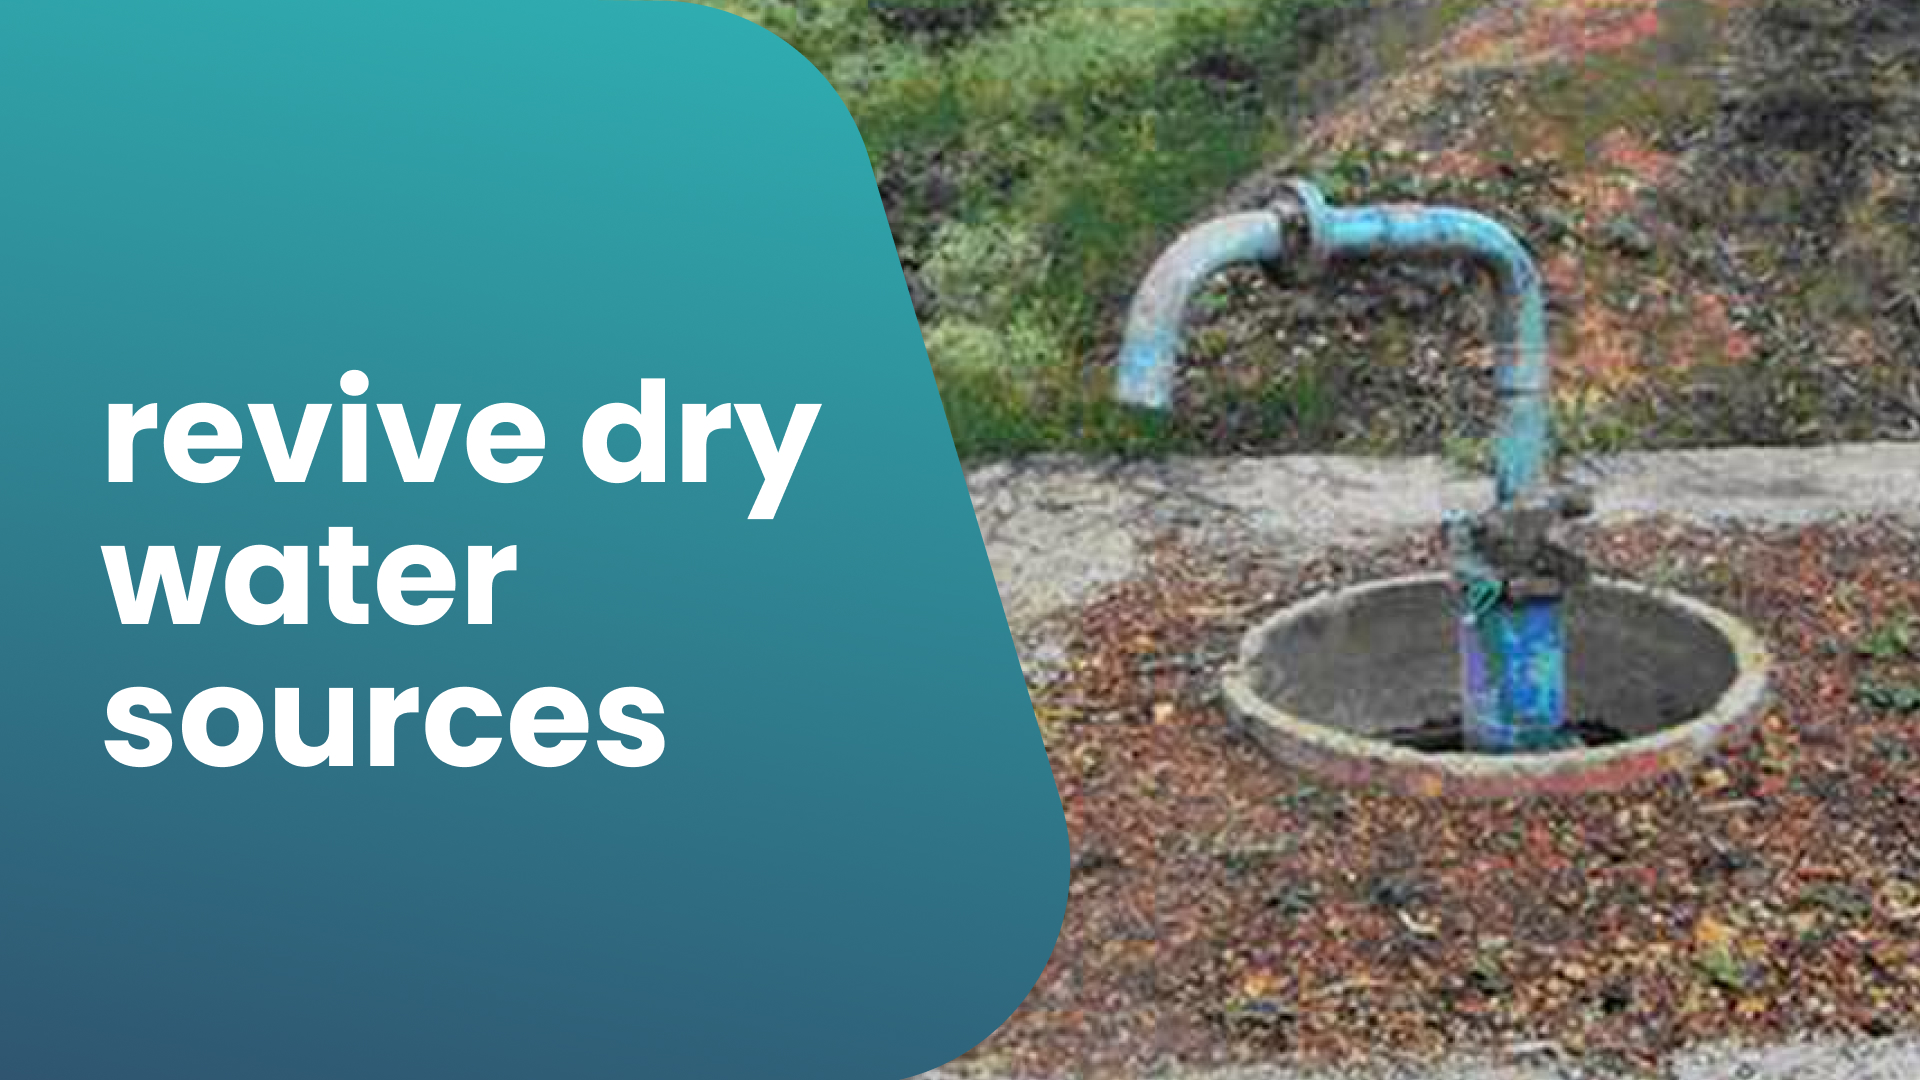 Course Trailer: Bore well Recharge Course - Learn to rejuvenate dried water source. Watch to know more.